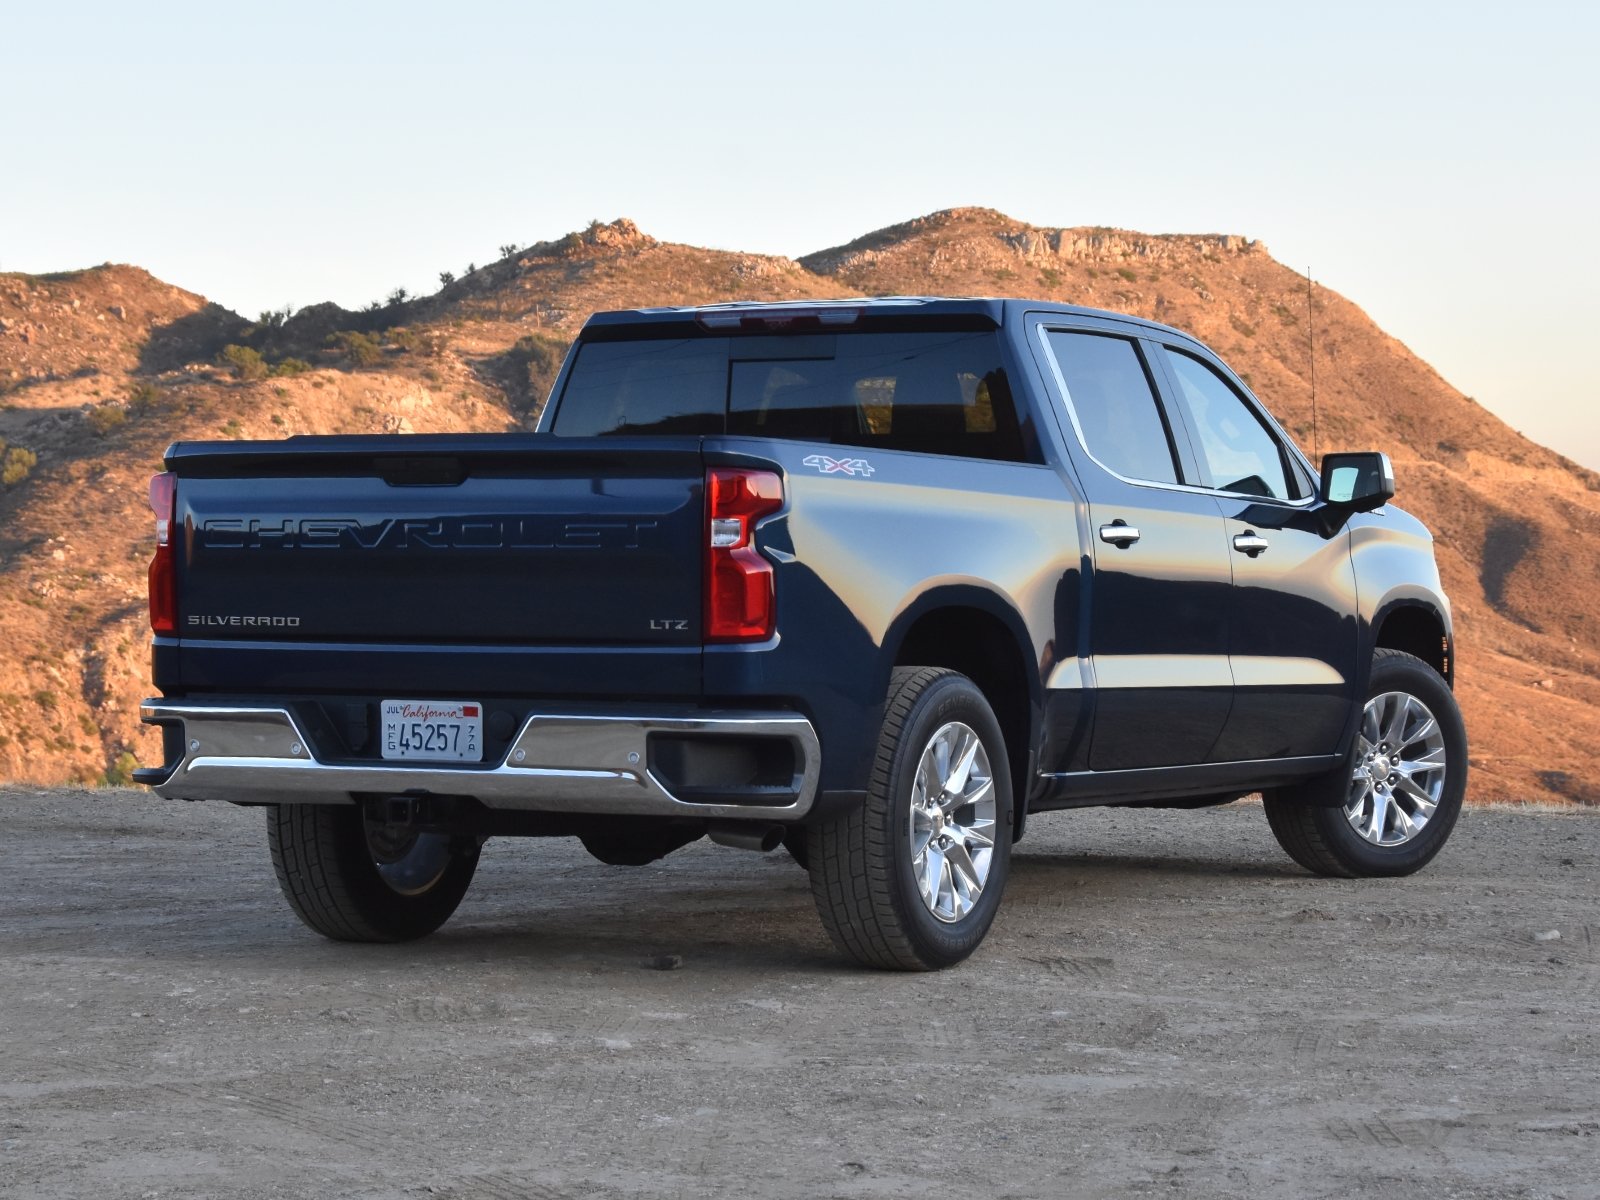 2021 Chevrolet Silverado 1500 Test Drive Review costEffectivenessImage